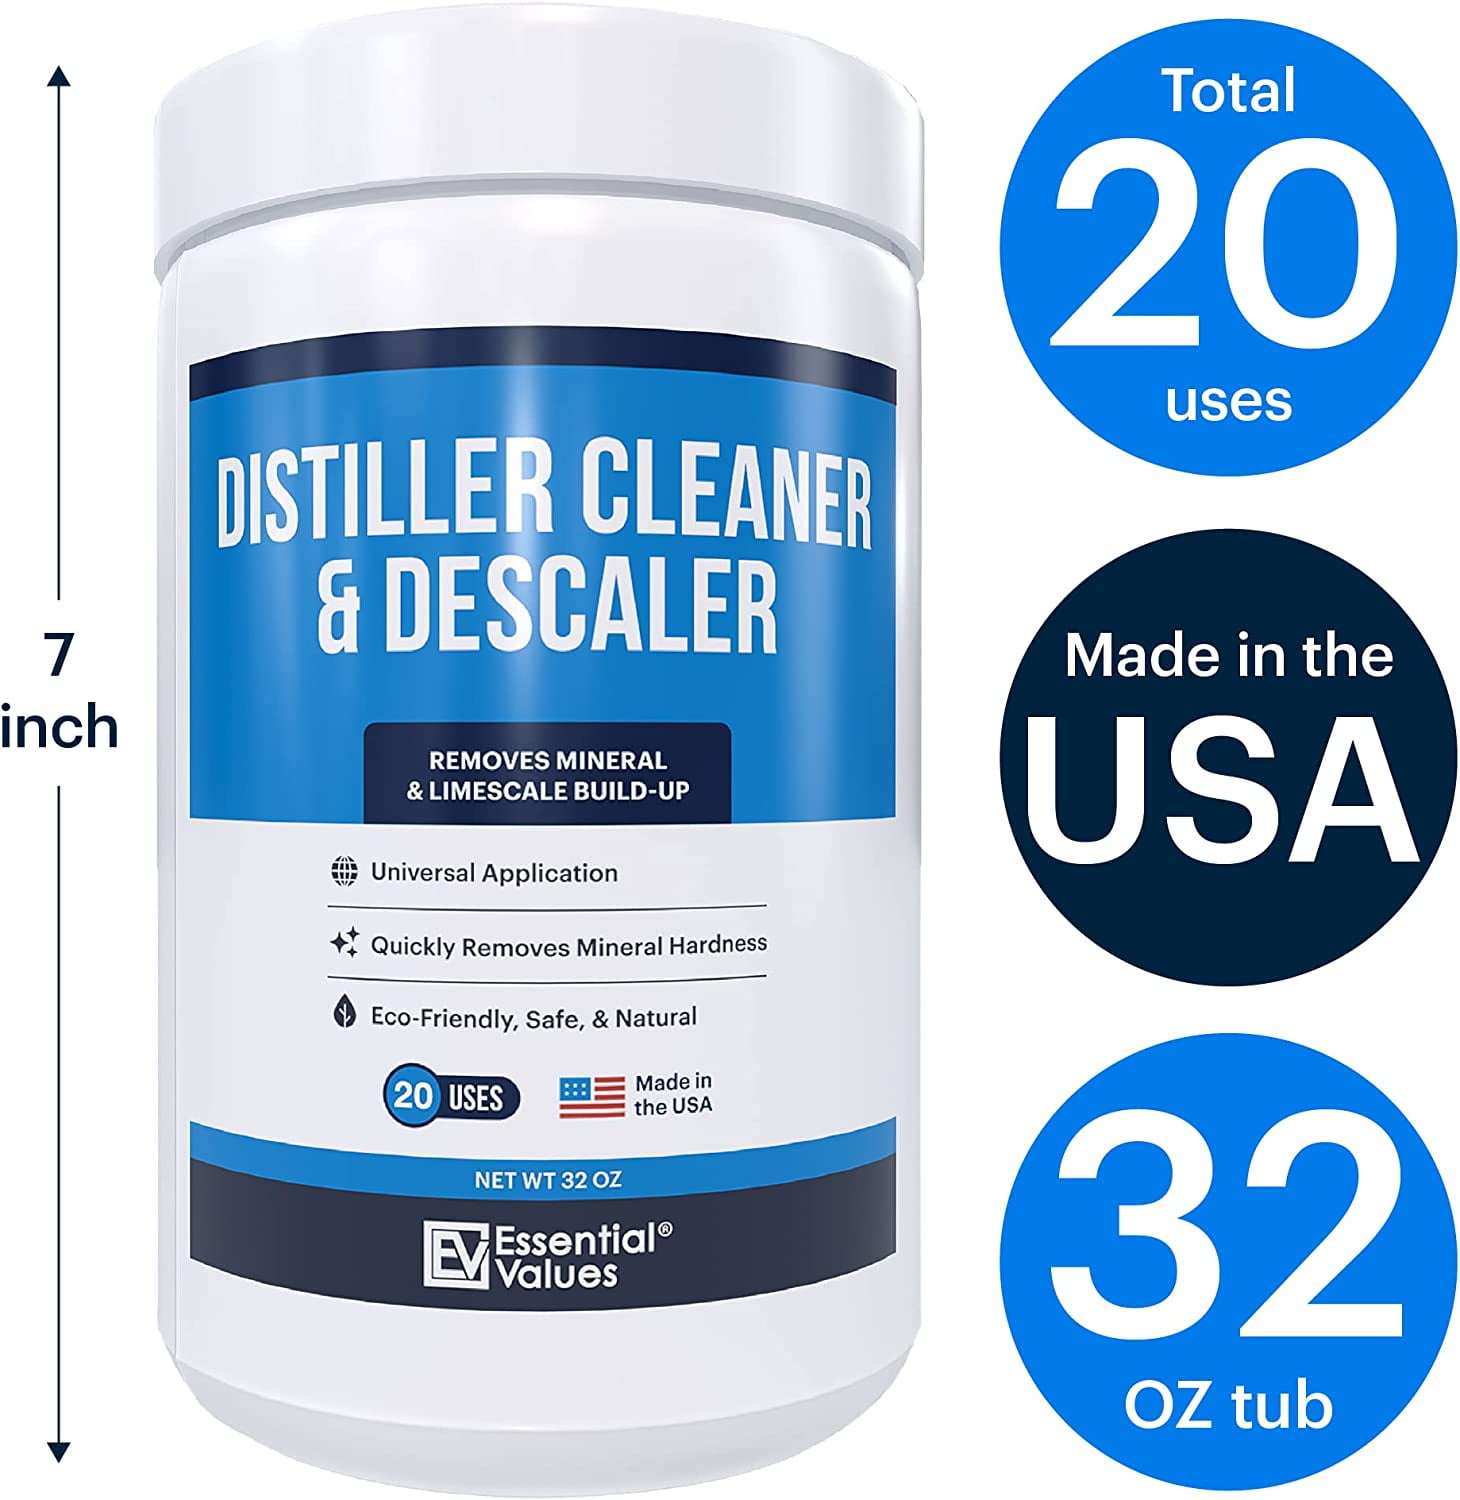 Distiller Cleaner Descaler (2 lbs) Citric Acid - Universal Application for Waterwise Natural & Safe – Deeply Penetrates Limescale & Water Mineral